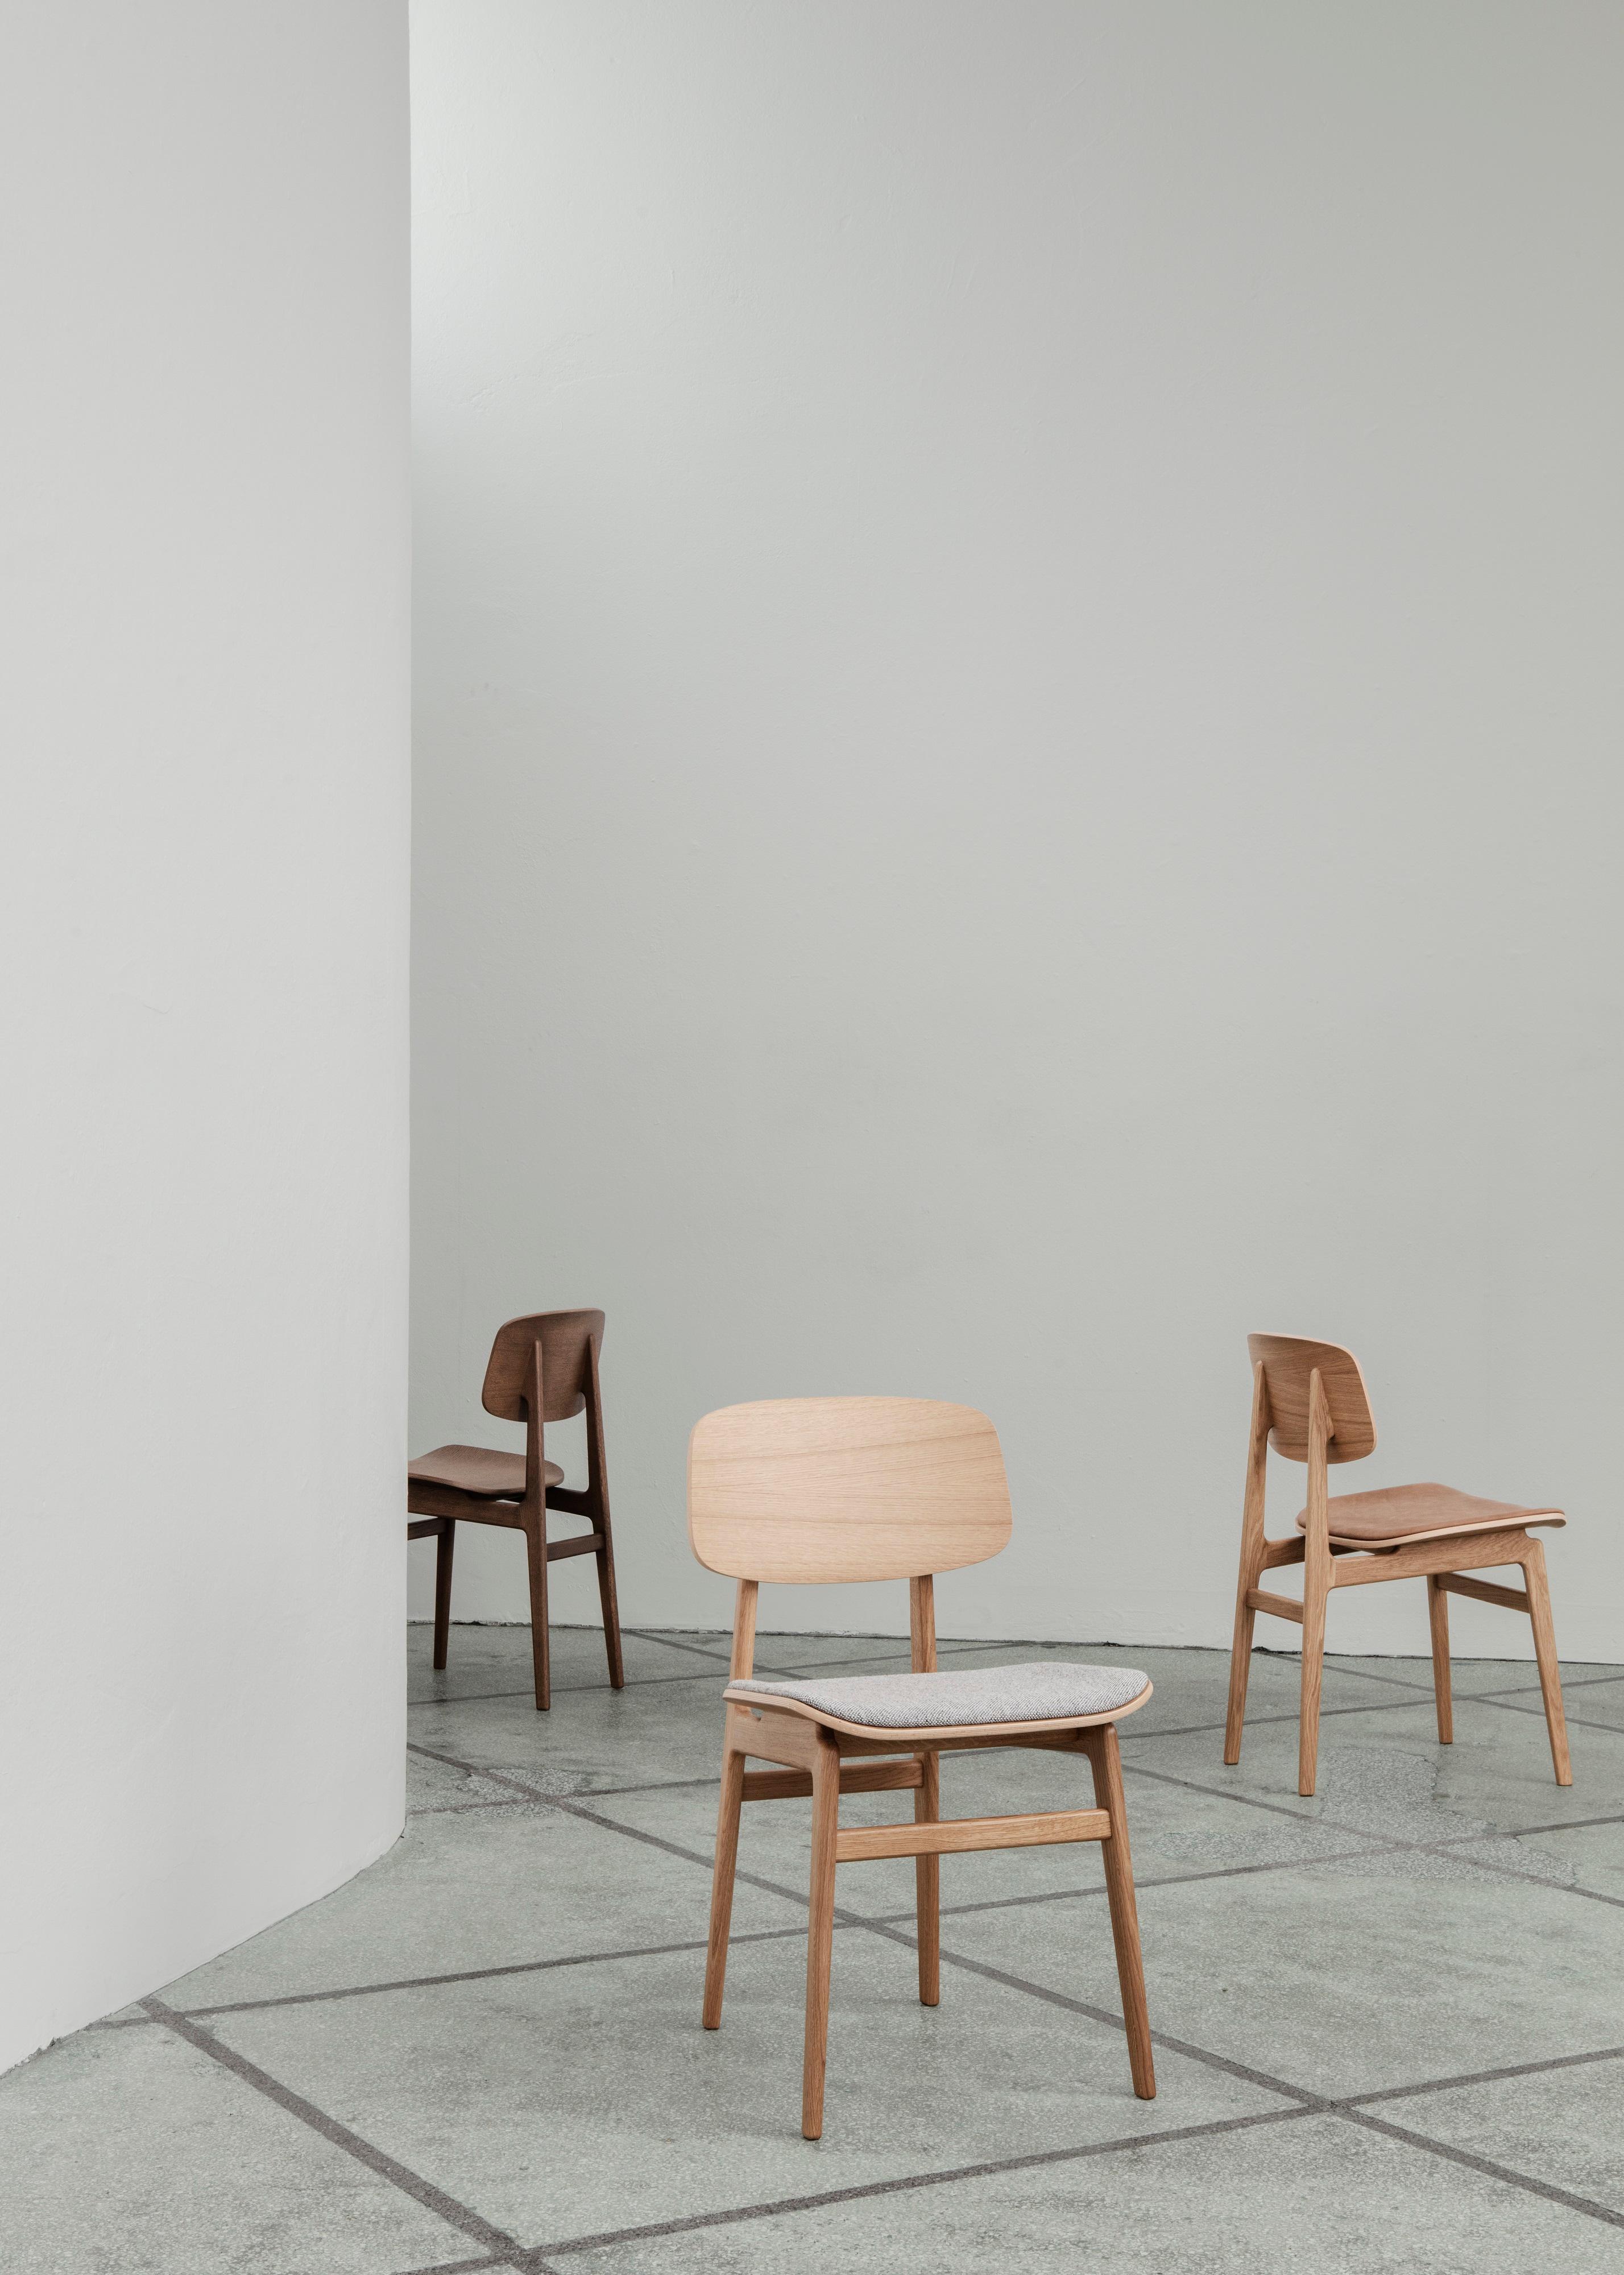 NY11 Chair by NORR11
Dimensions: D 52 x W 45,5 x H 78 cm. SH 45,5 cm / SH w. upholstery 46,5 cm.
Materials: Light smoked oak and leather.
Upholstery: Dunes Anthrazite 21003. 

Available in different oak finishes: Natural oak, light smoked oak, dark